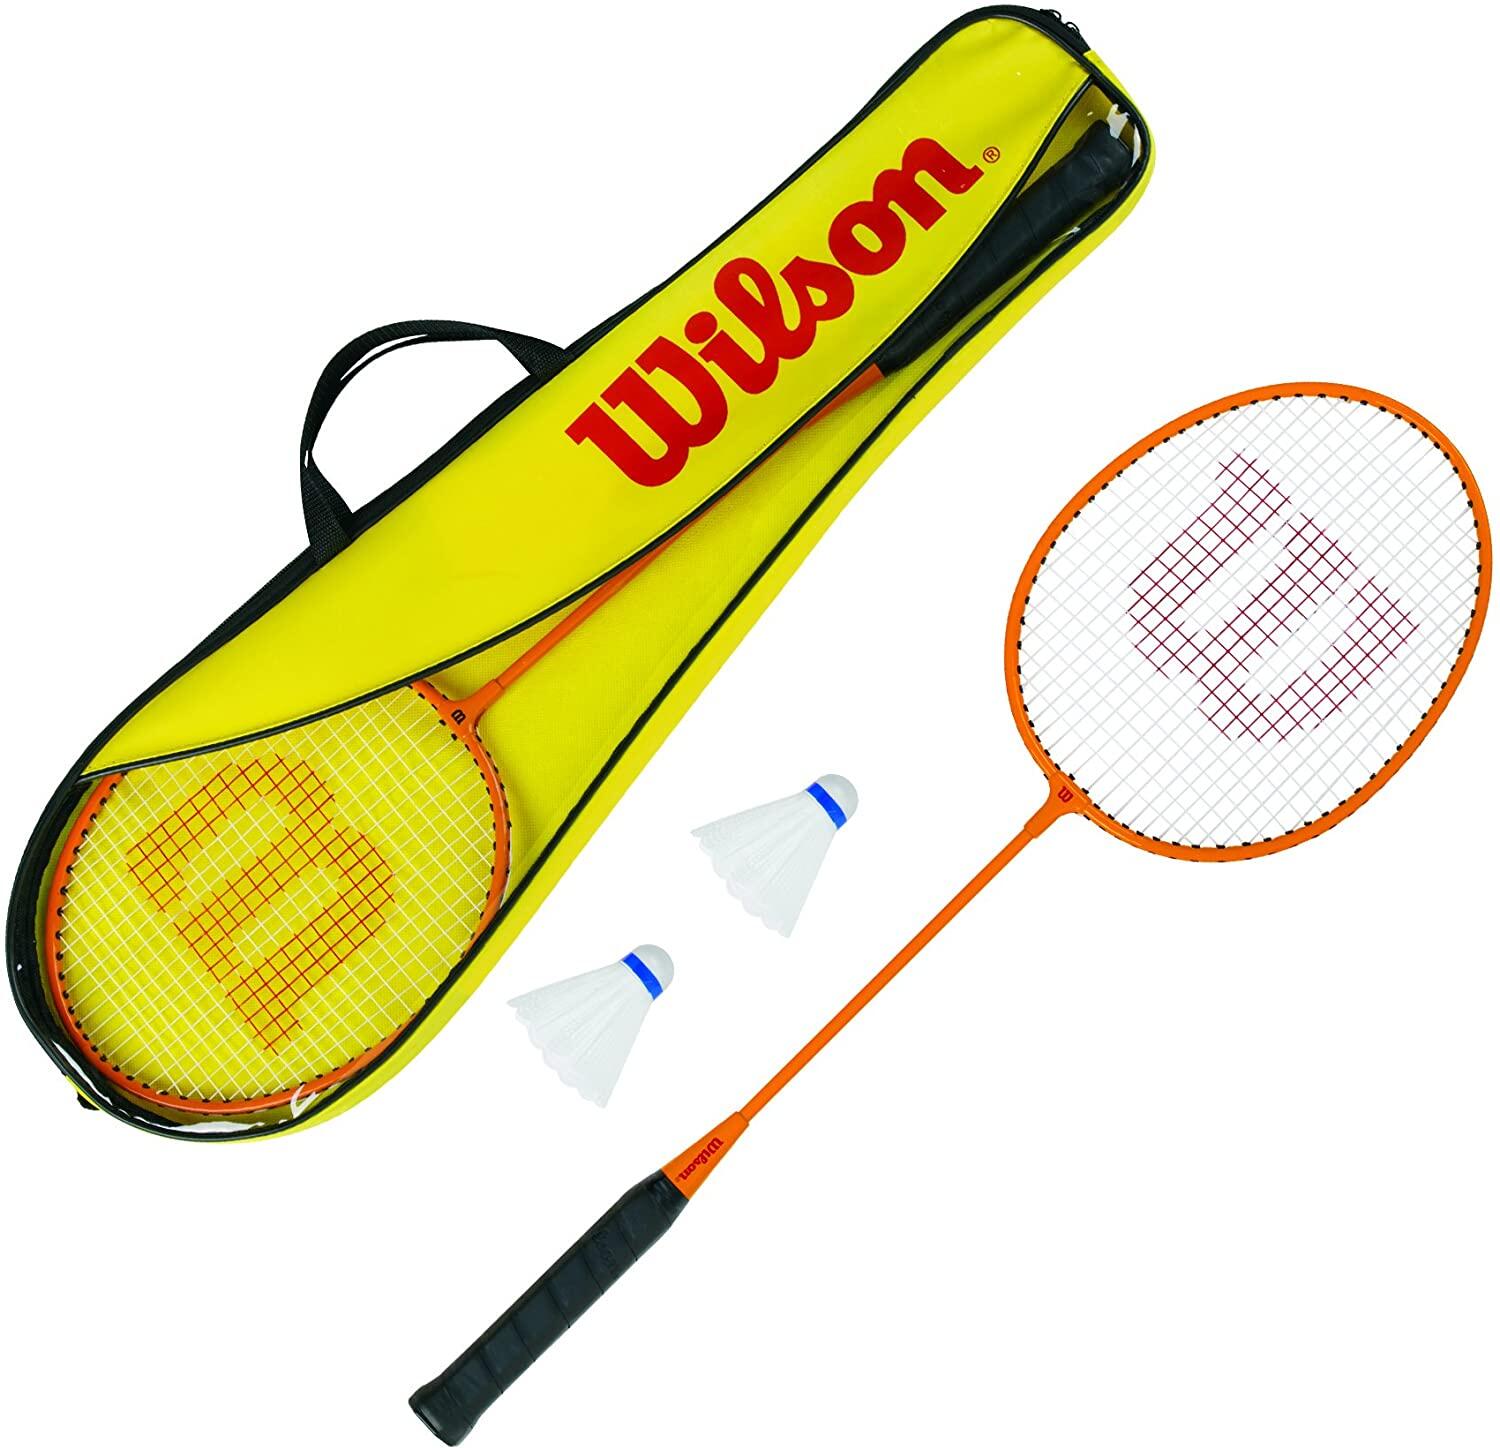 WILSON Wilson 2 Player Badminton Set Including 2 Rackets And Shuttles